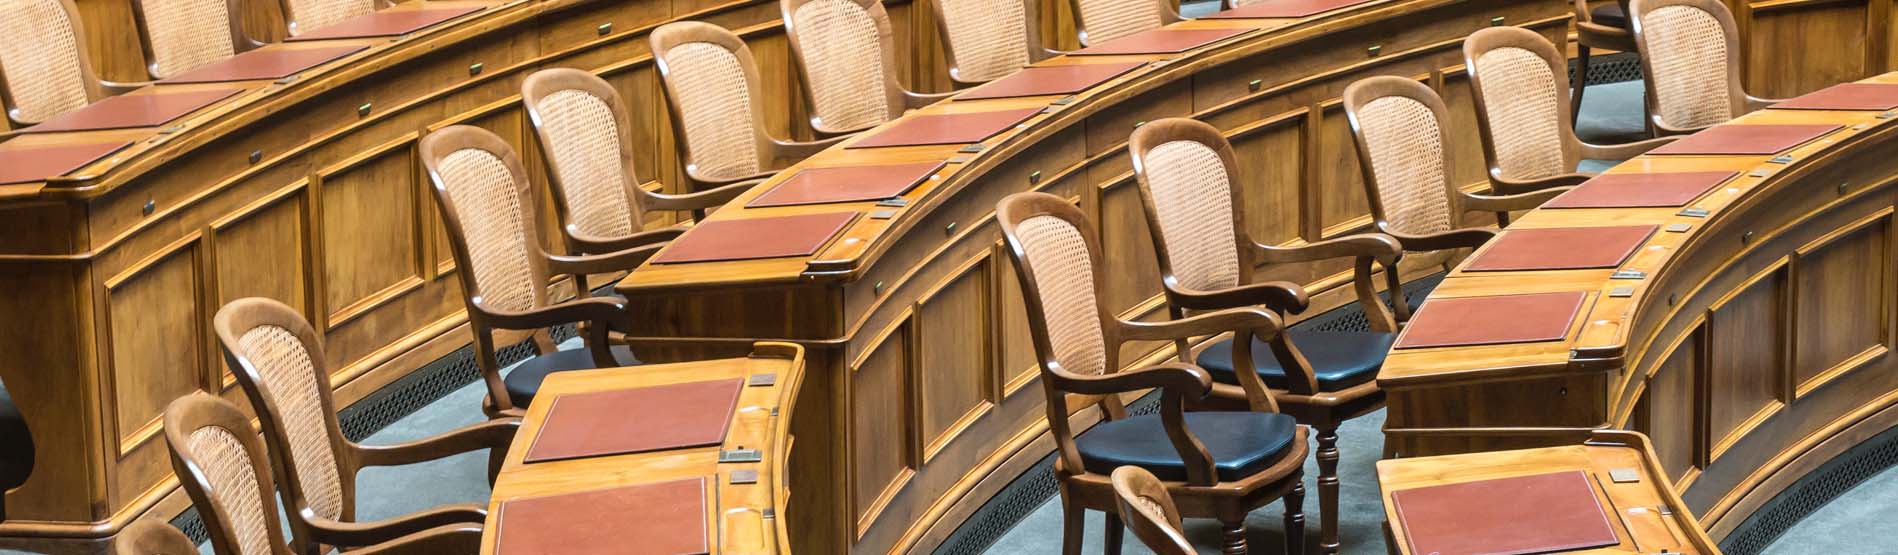 Chairs in parliament